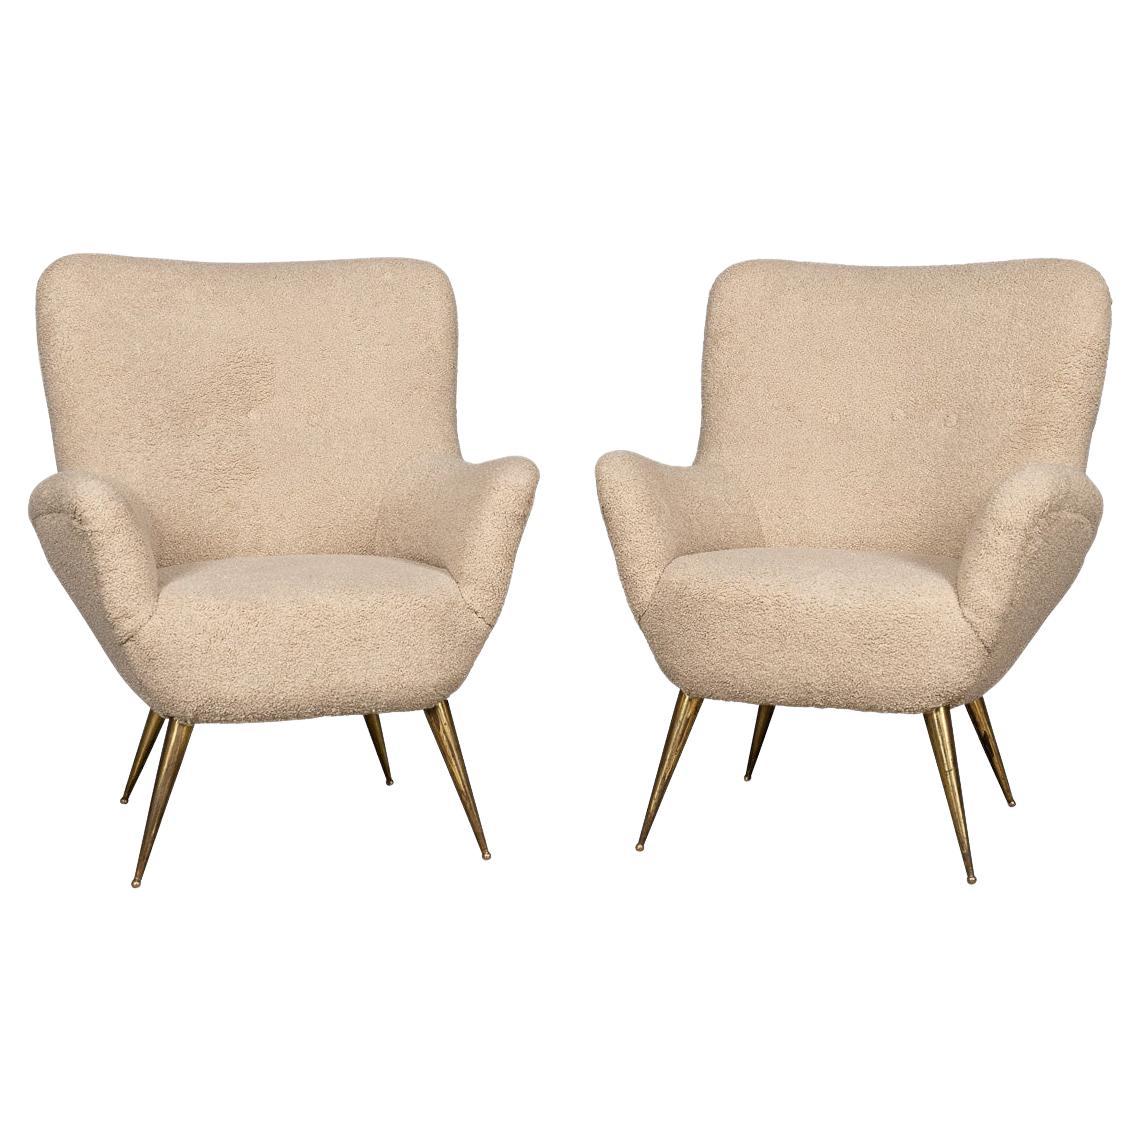 20th Century Pair Of Italian Armchairs In Cream Boucle, c.1950 For Sale